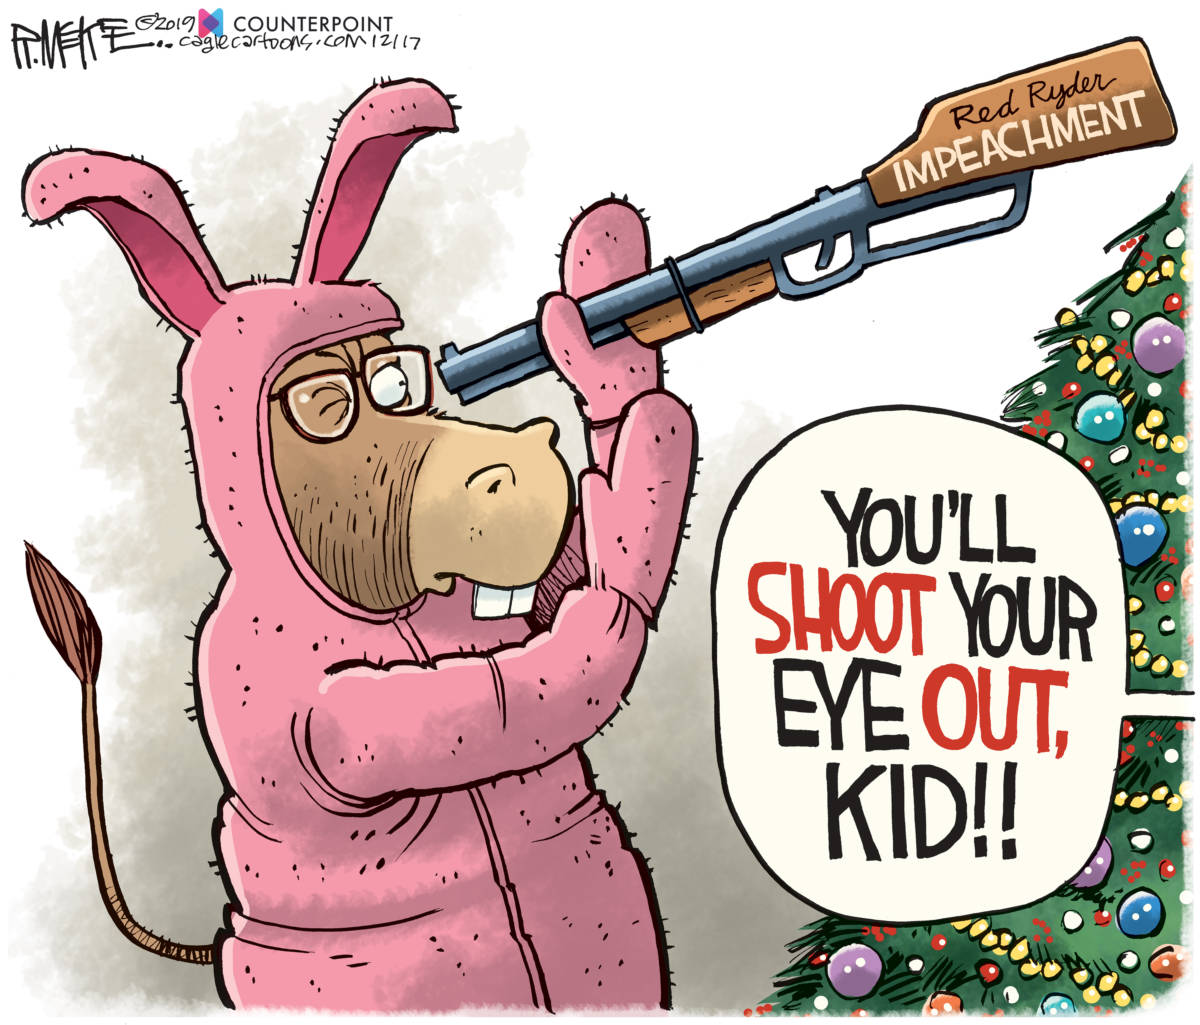 Dems Shoot Eye Out by Rick McKee, Counterpoint